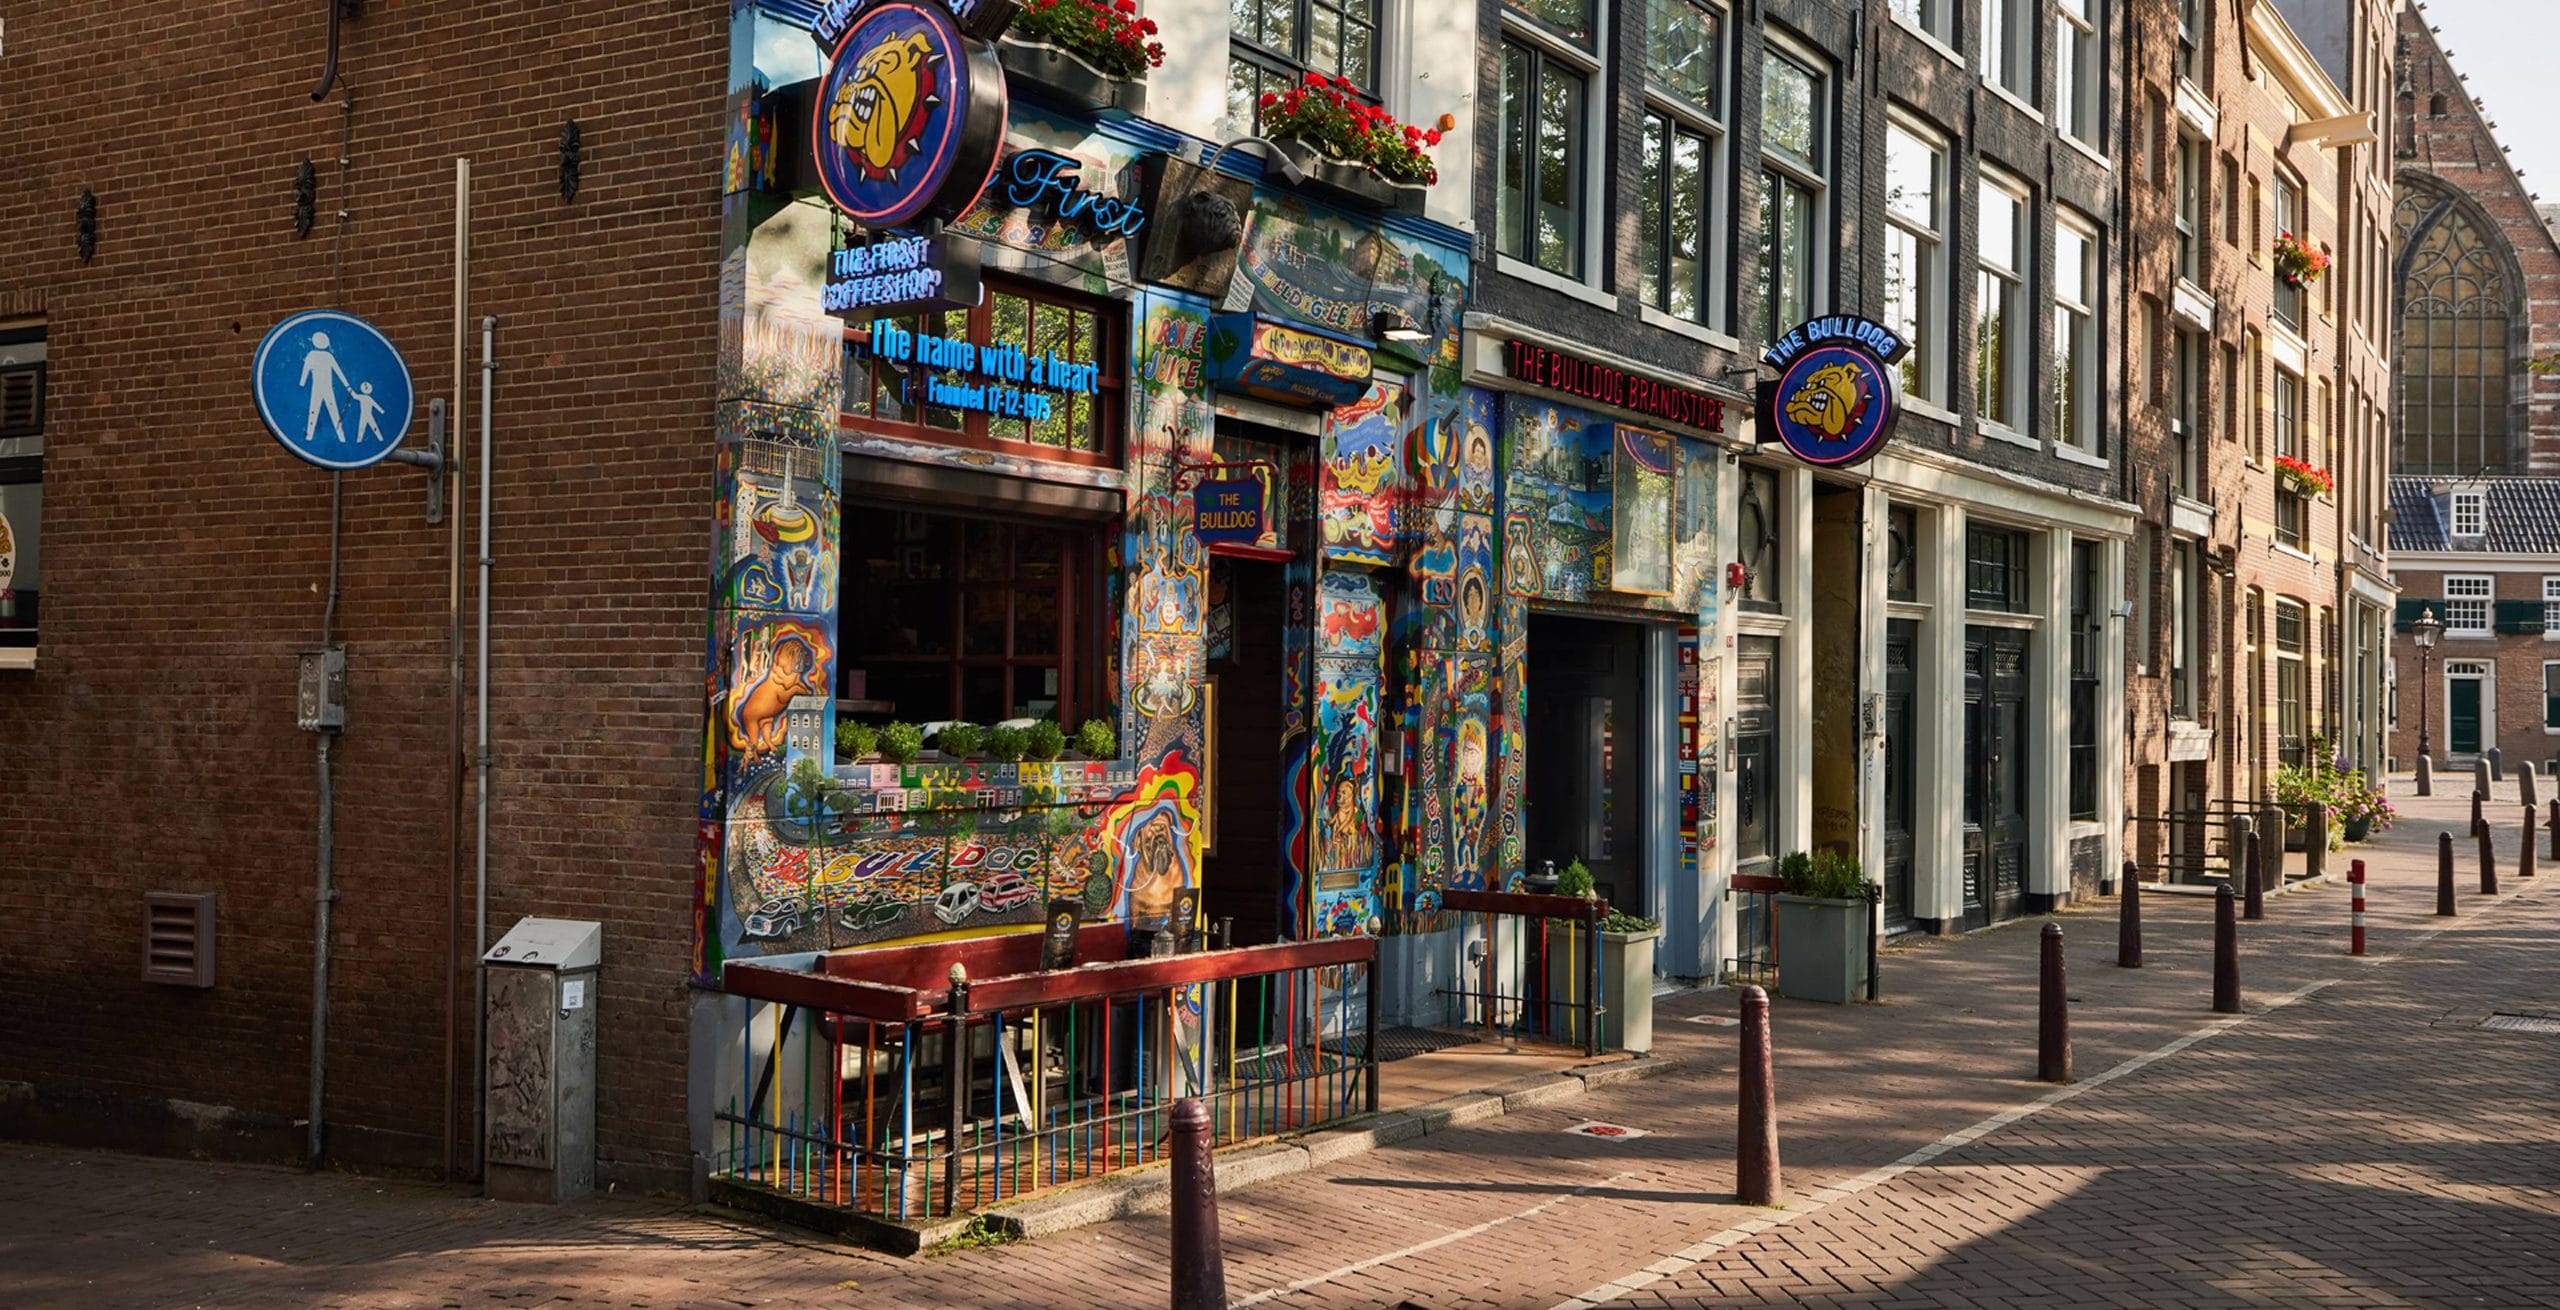 The Bulldog, the first coffee shop in Amsterdam, Holland Stock